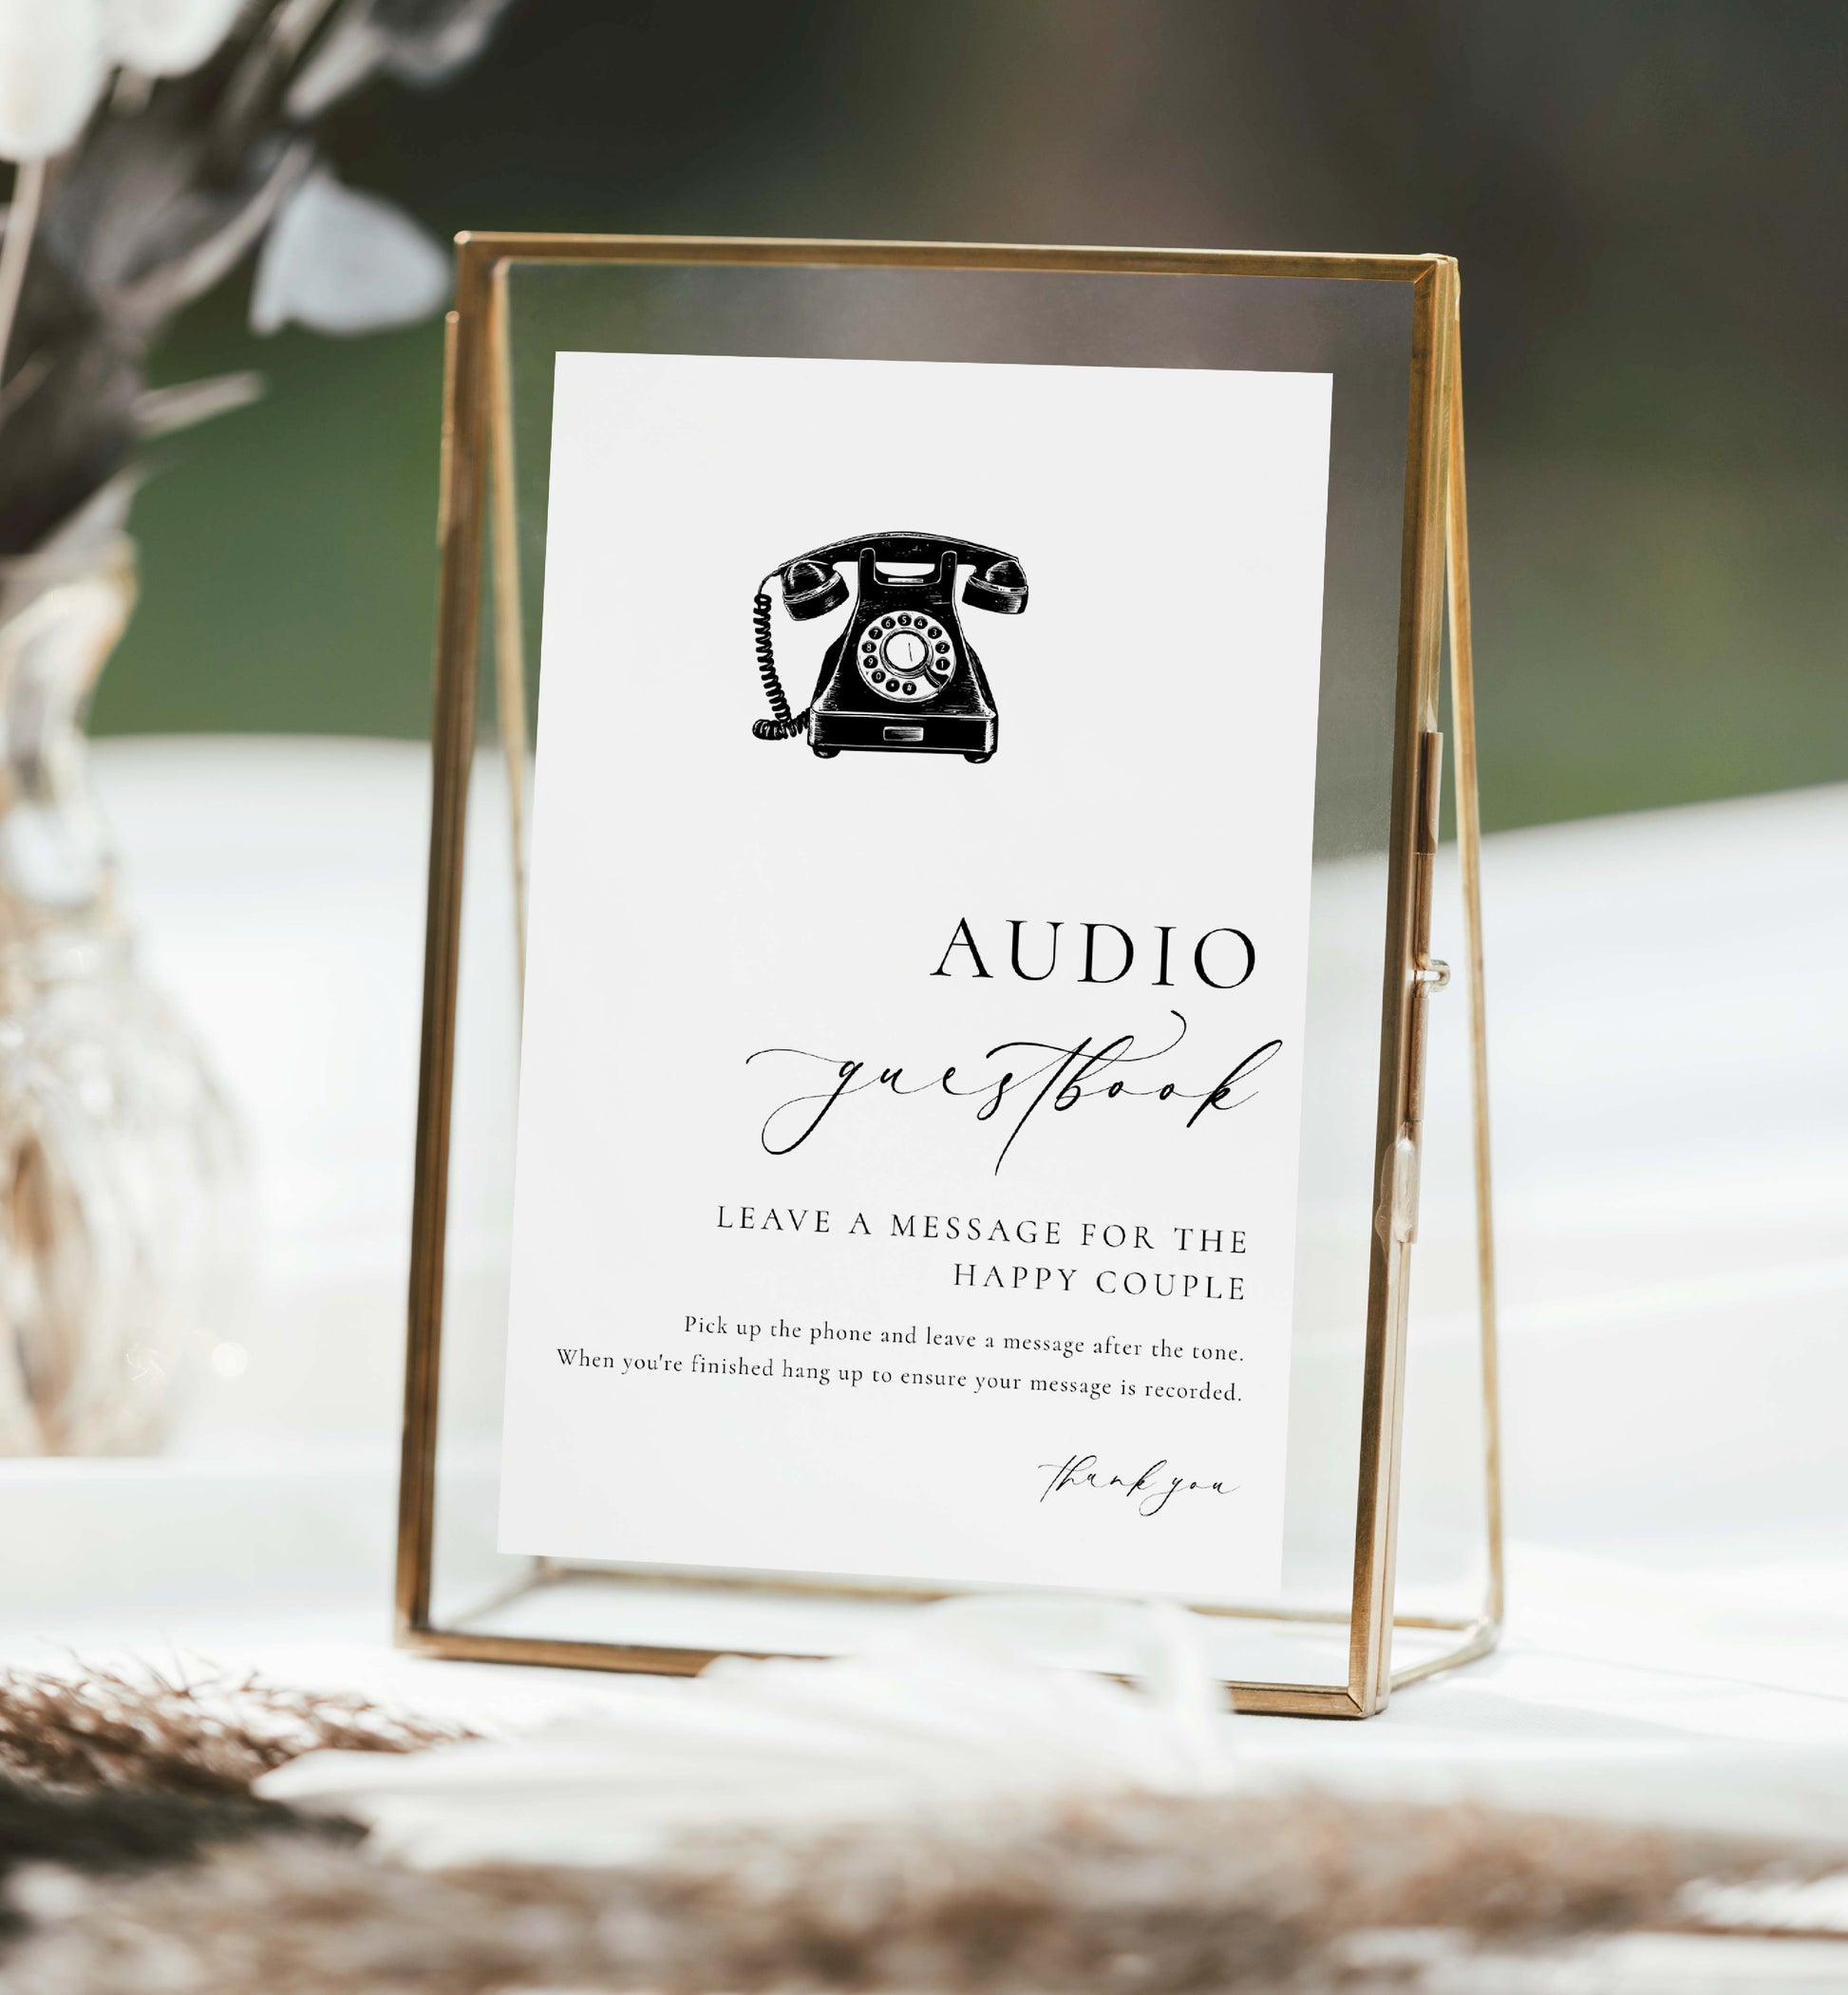 Free Printable Audio Guestbook Sign - The Audio Guestbook Co.